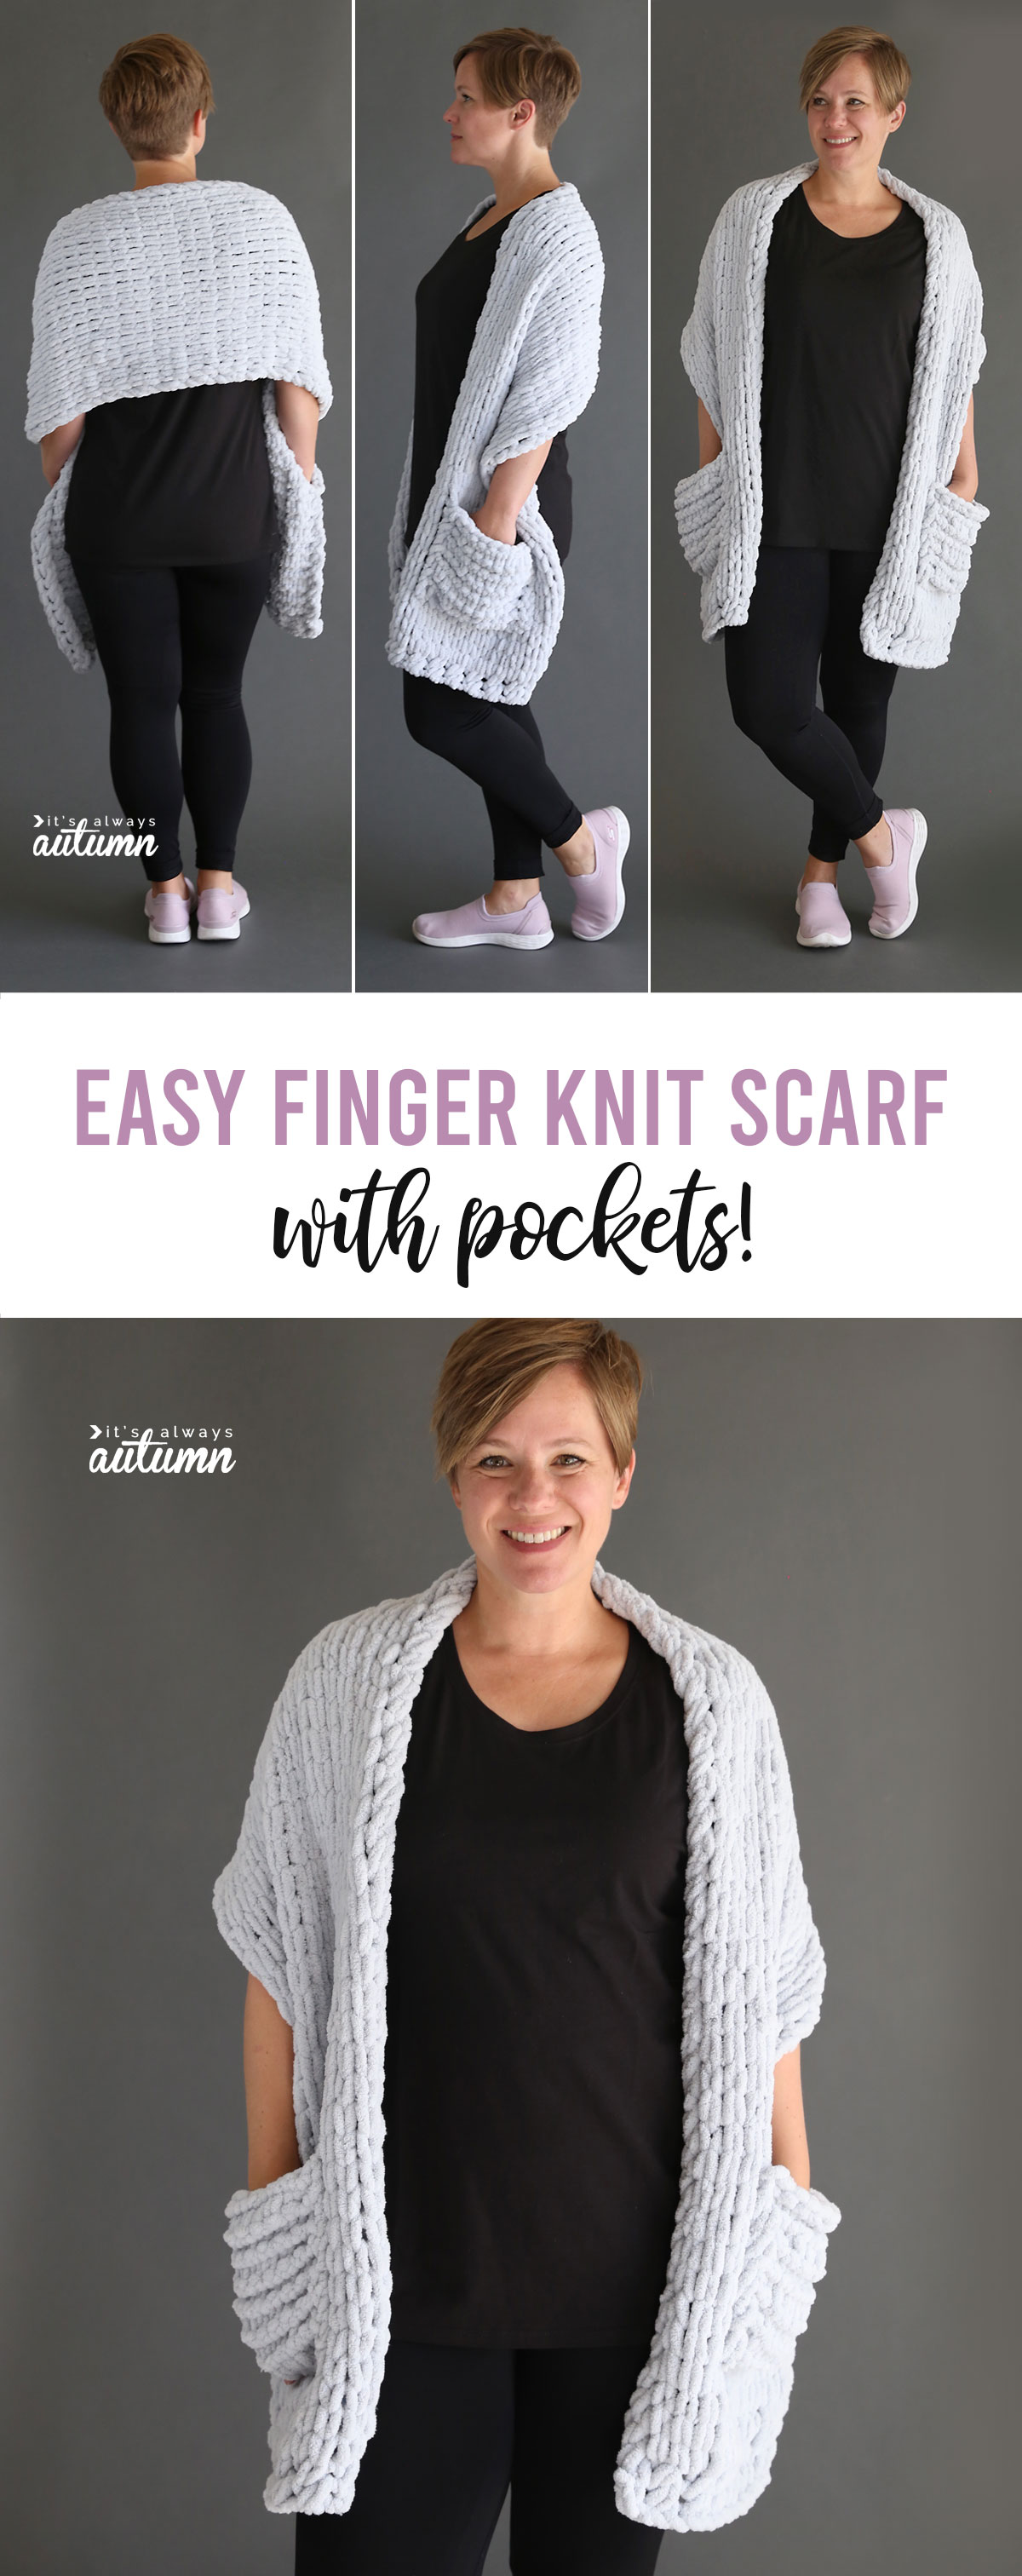 This easy finger knit scarf looks like a cardigan from the front and a wrap from the back and it's super simple to make using loop yarn.